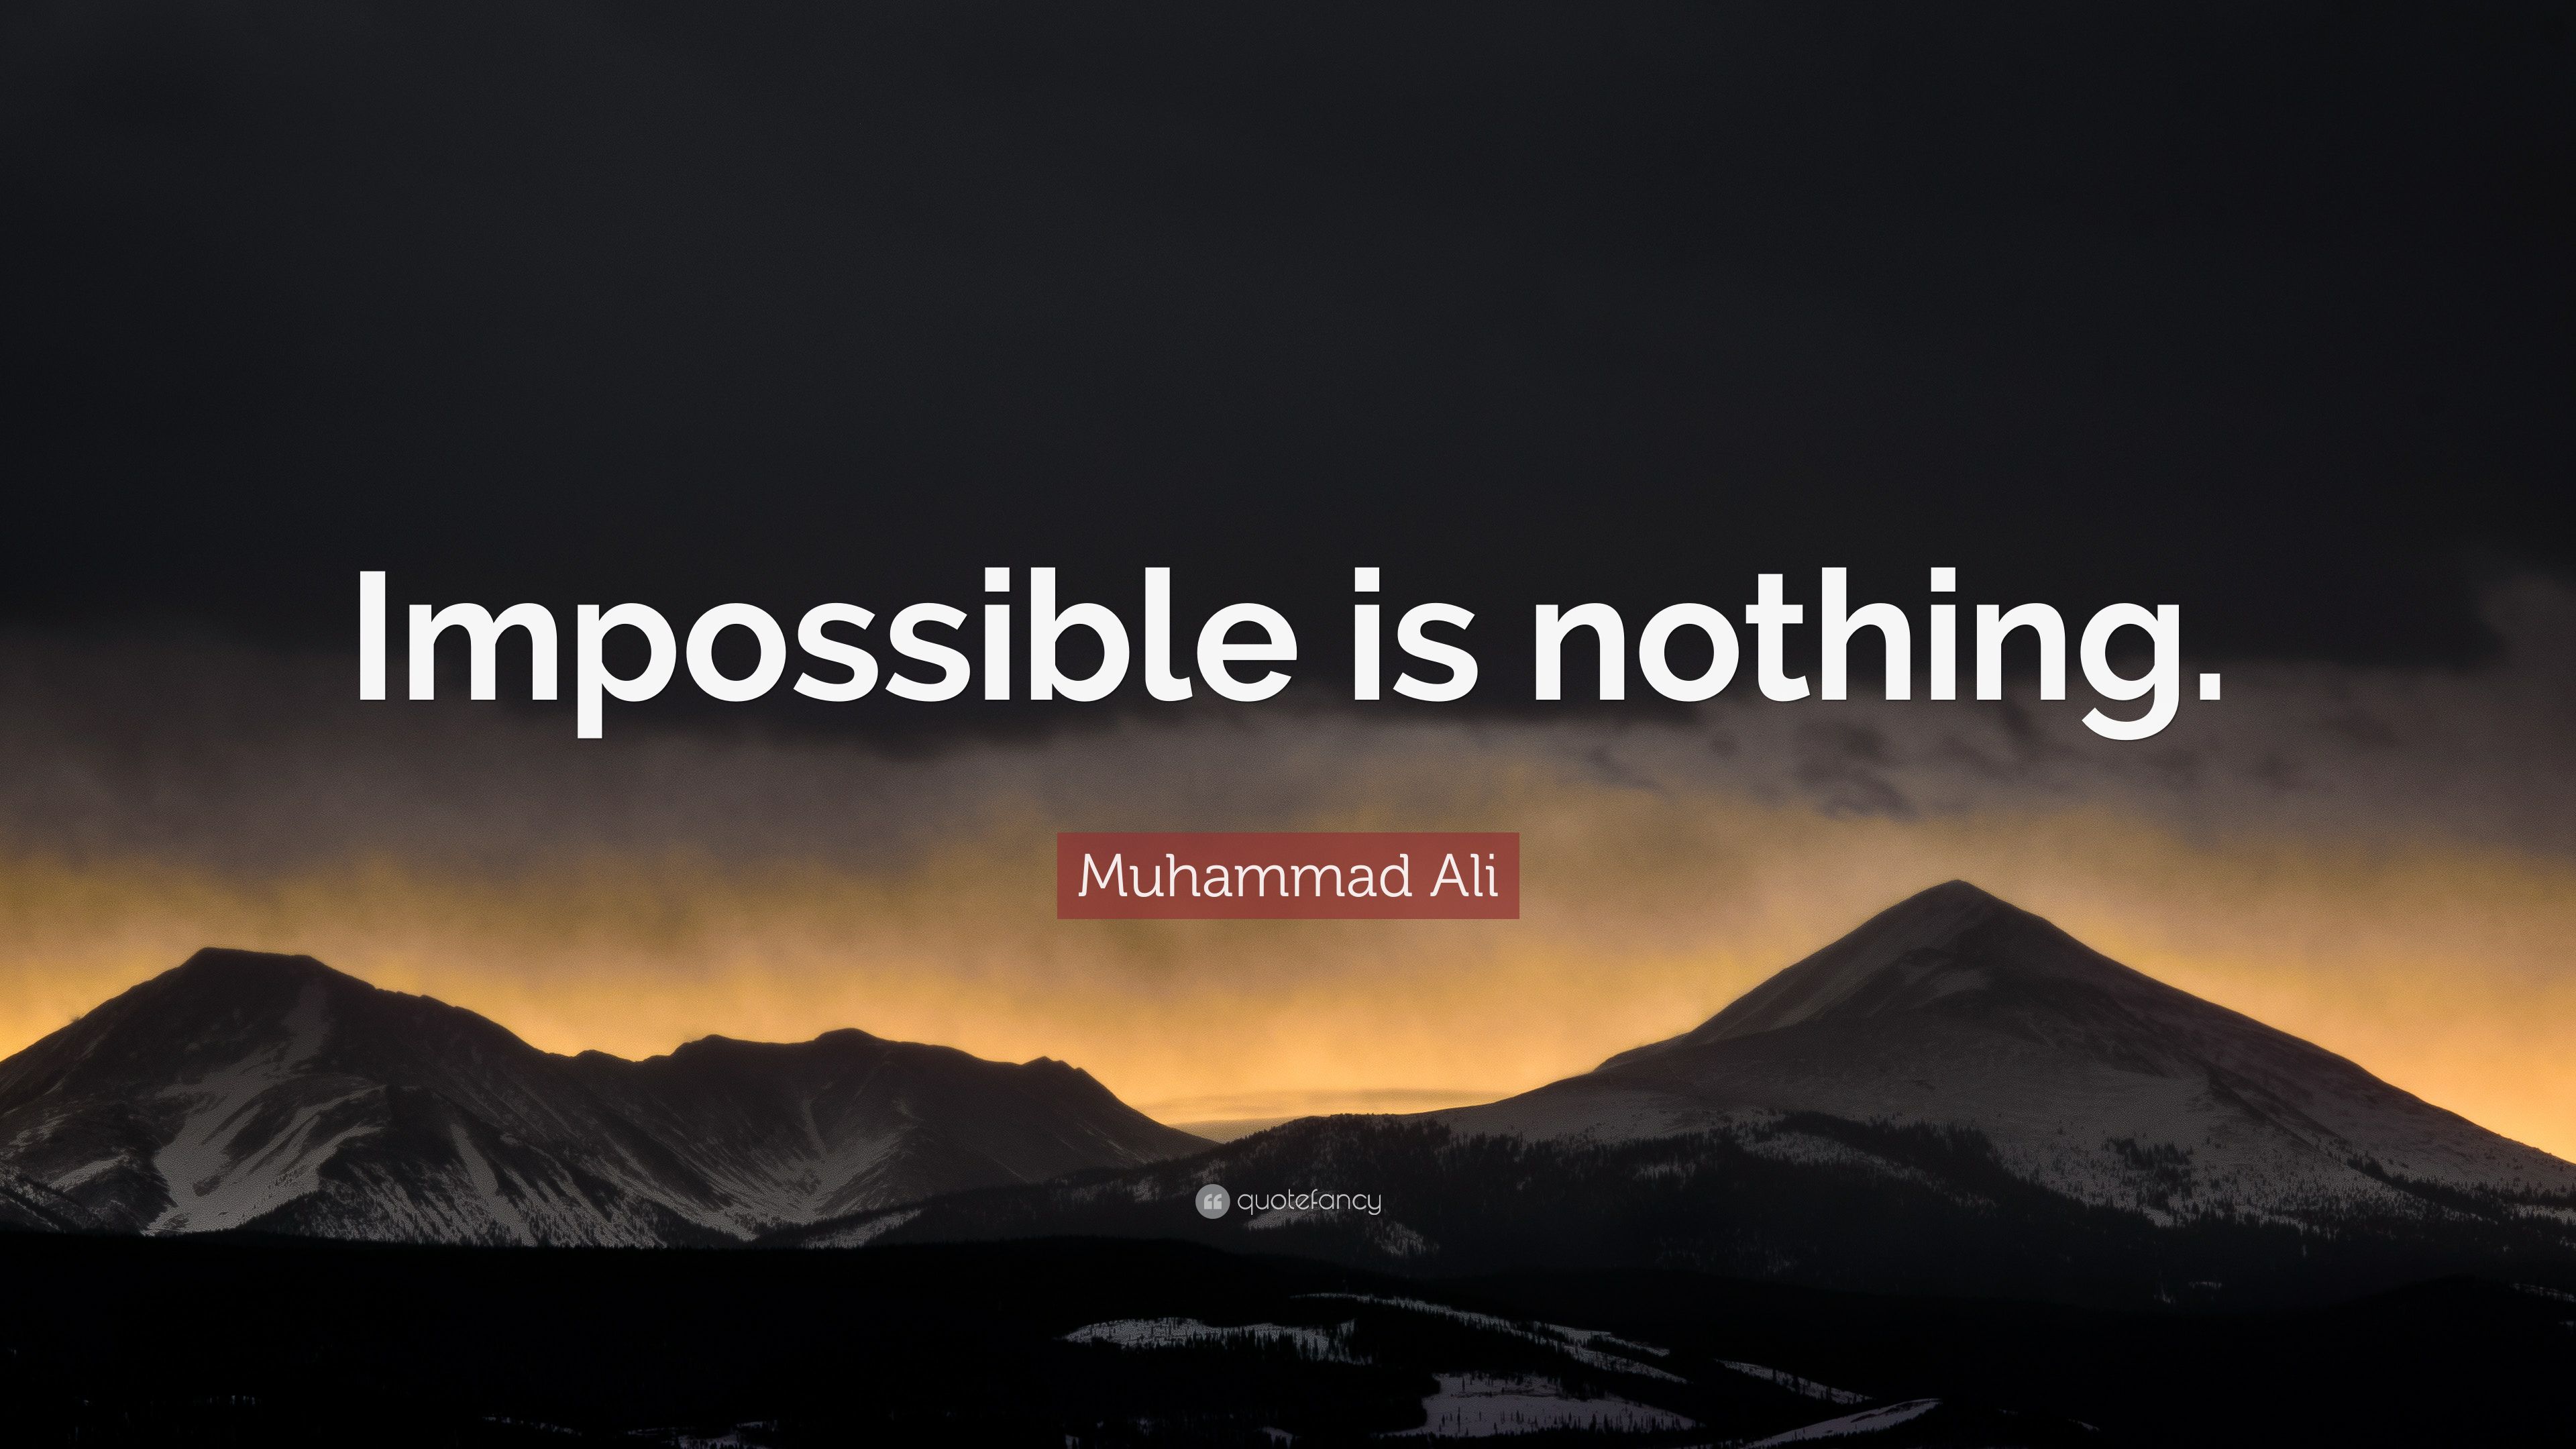 Muhammad Ali Quote: “Impossible is nothing.”